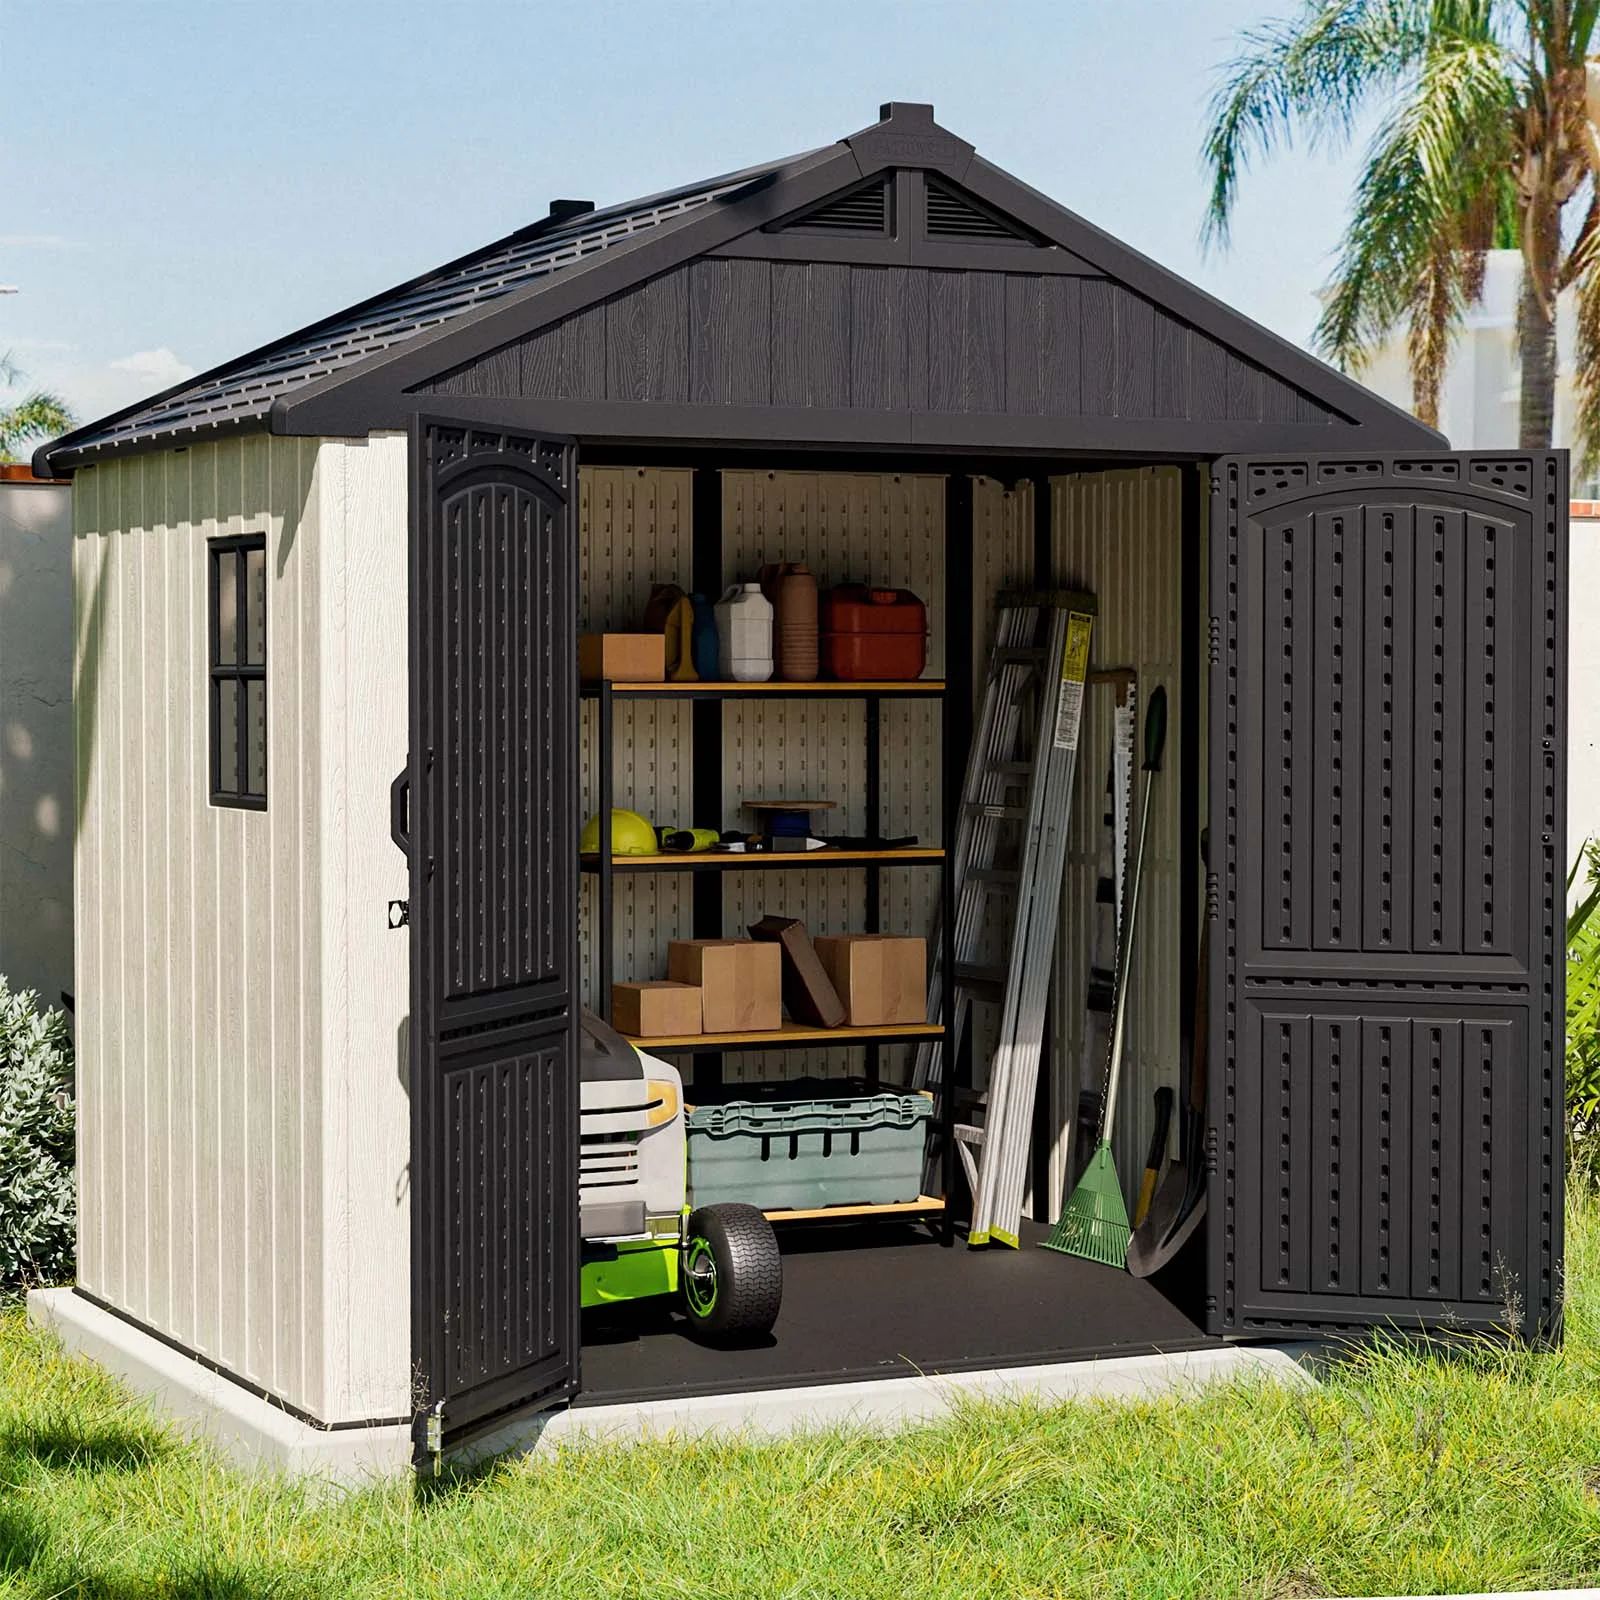 Patiowell 8' x 6' Plastic Shed for Outdoor Storage, Resin Shed with Window and Lockable Door for ... | Walmart (US)